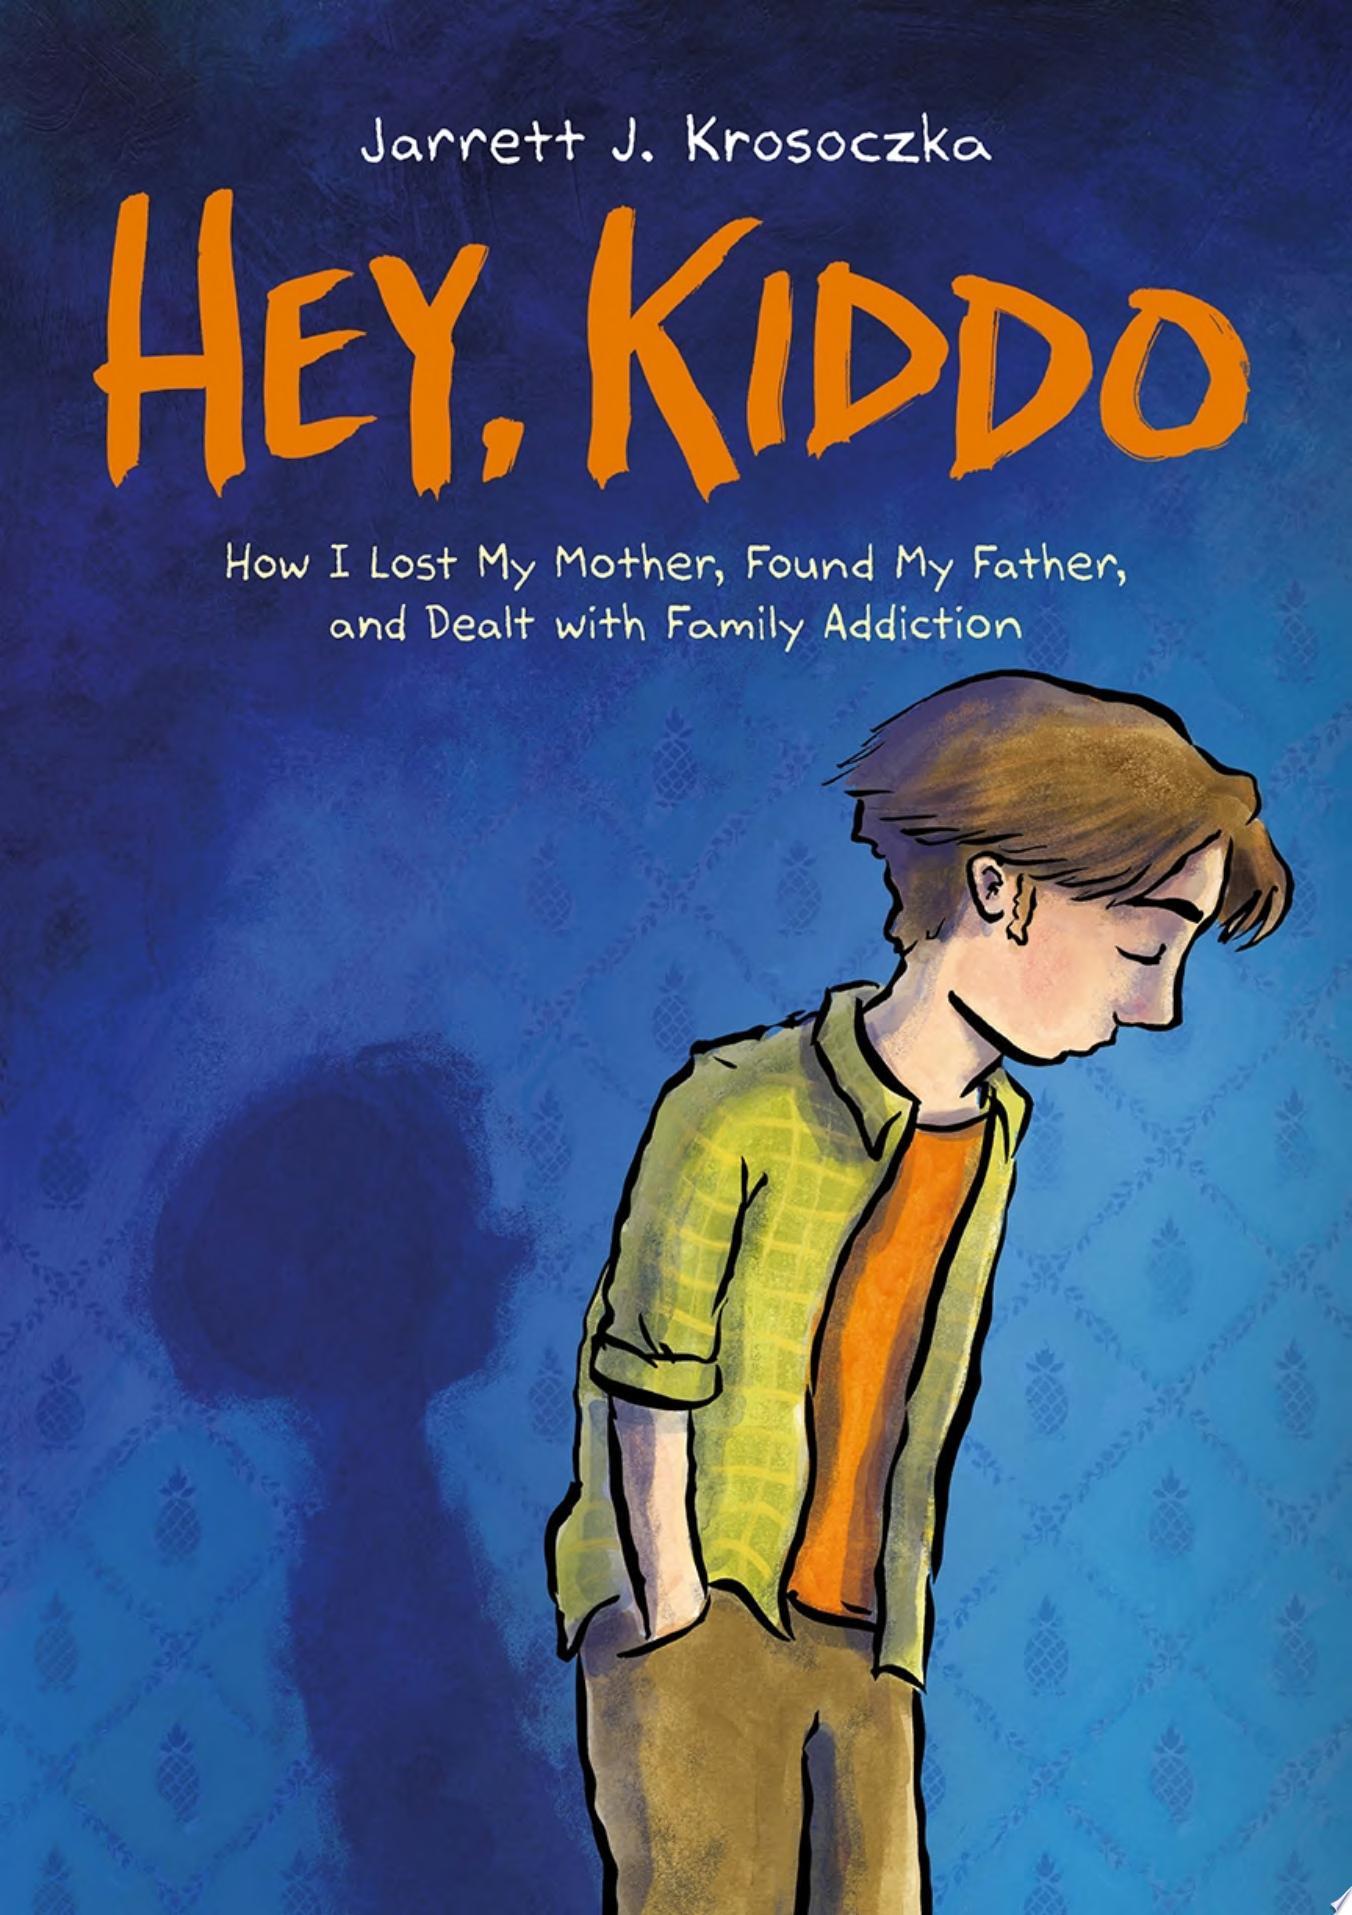 Image for "Hey, Kiddo: A Graphic Novel"